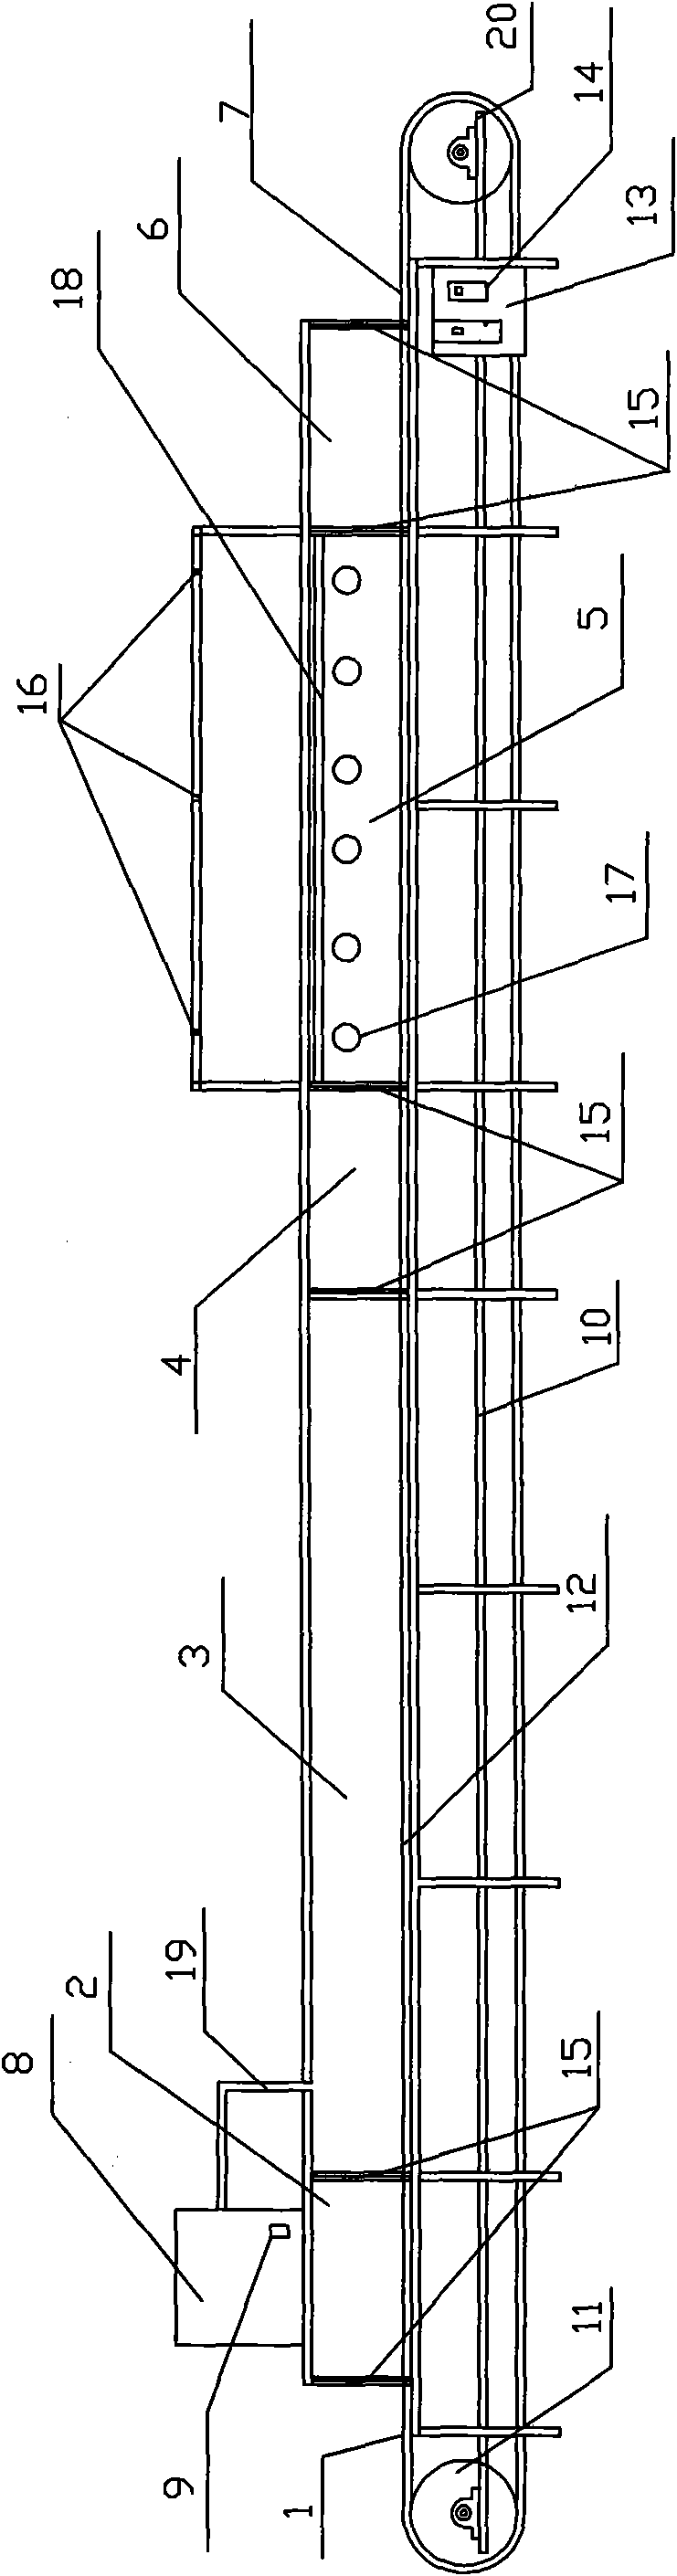 Large-scale aseptic-manipulation continuous production equipment